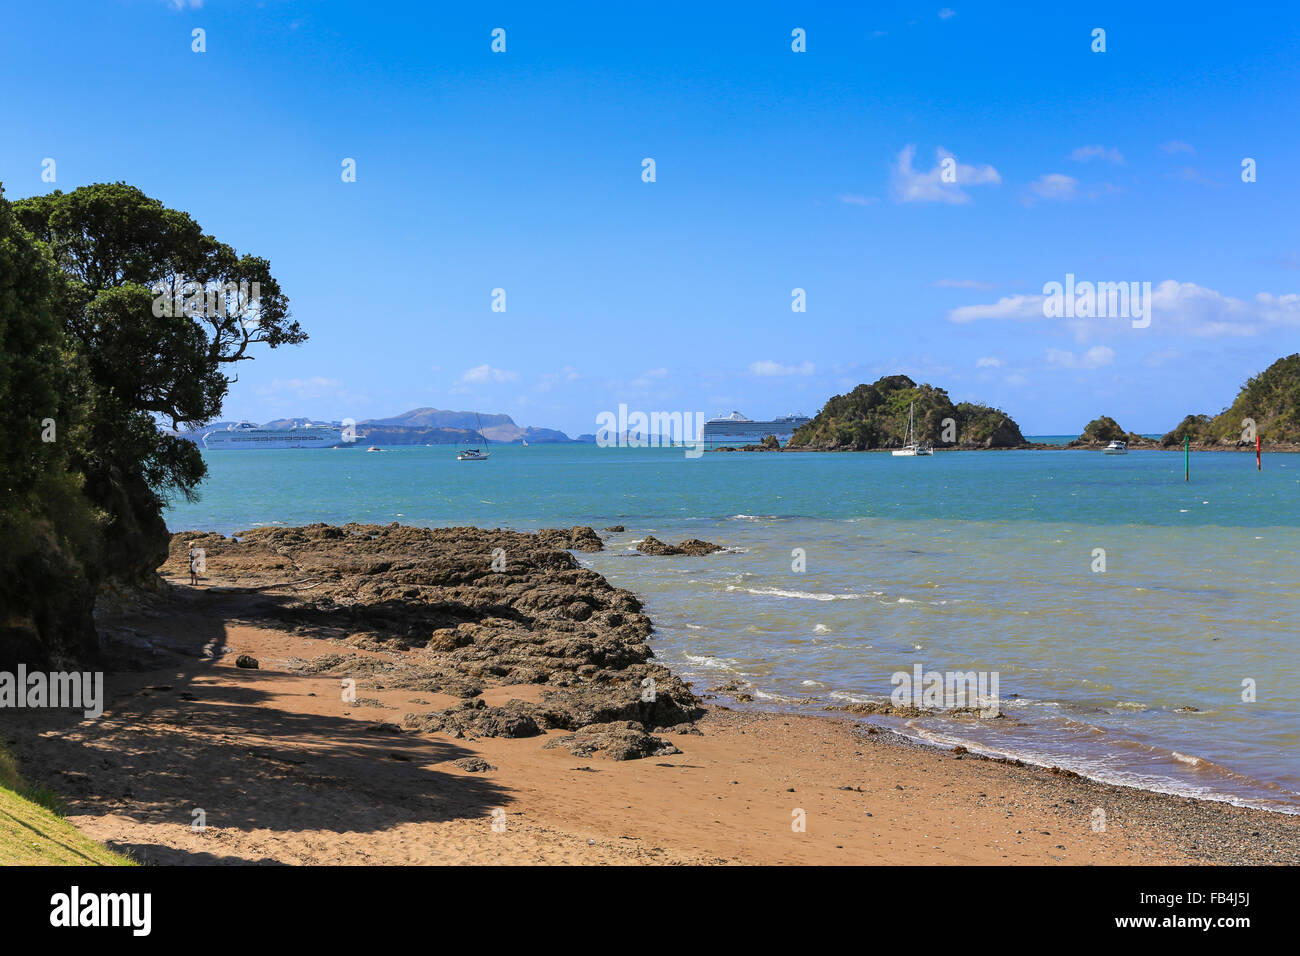 Cruise ships anchored in scenic Bay of Islands, Paihia, Northland, New Zealand. Stock Photo